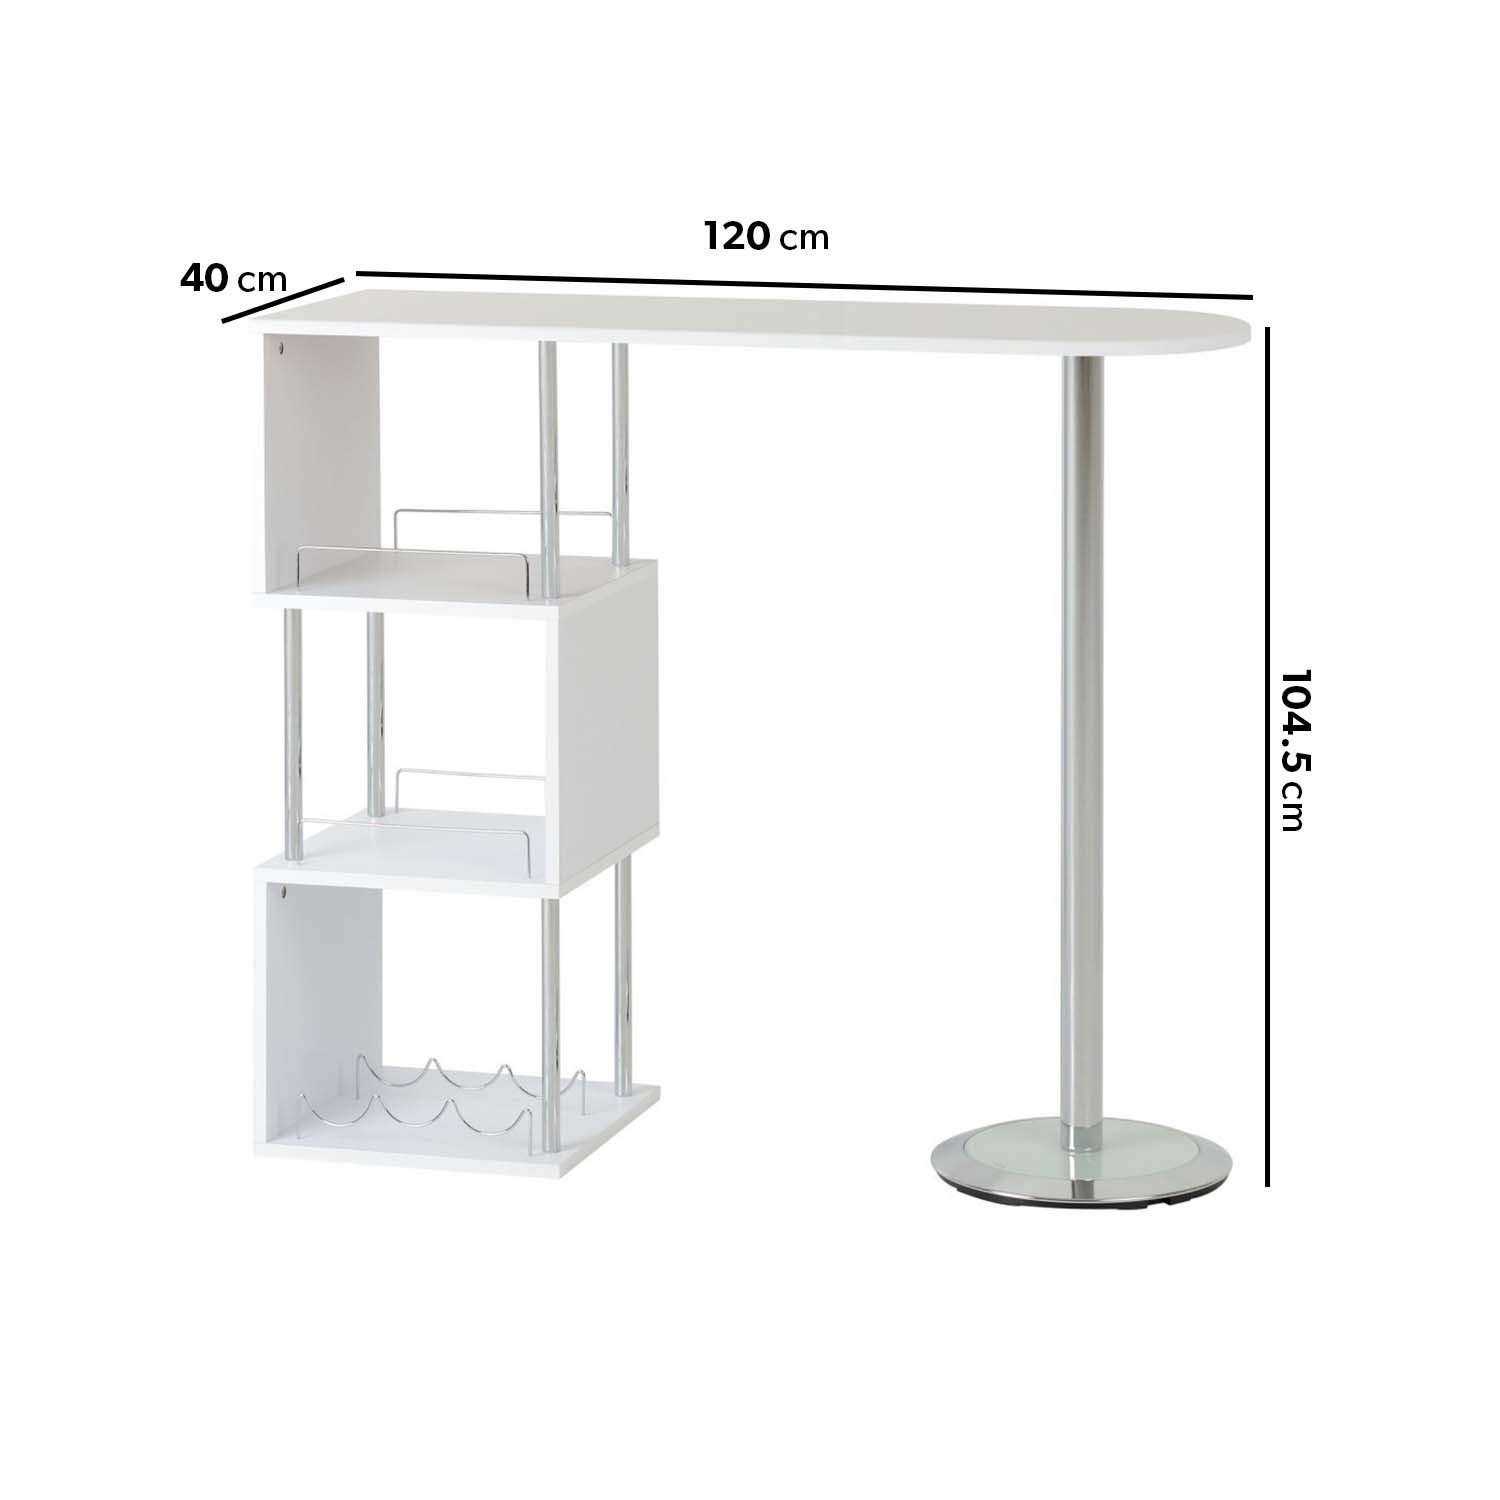 Read more about White breakfast bar table with shelving charisma